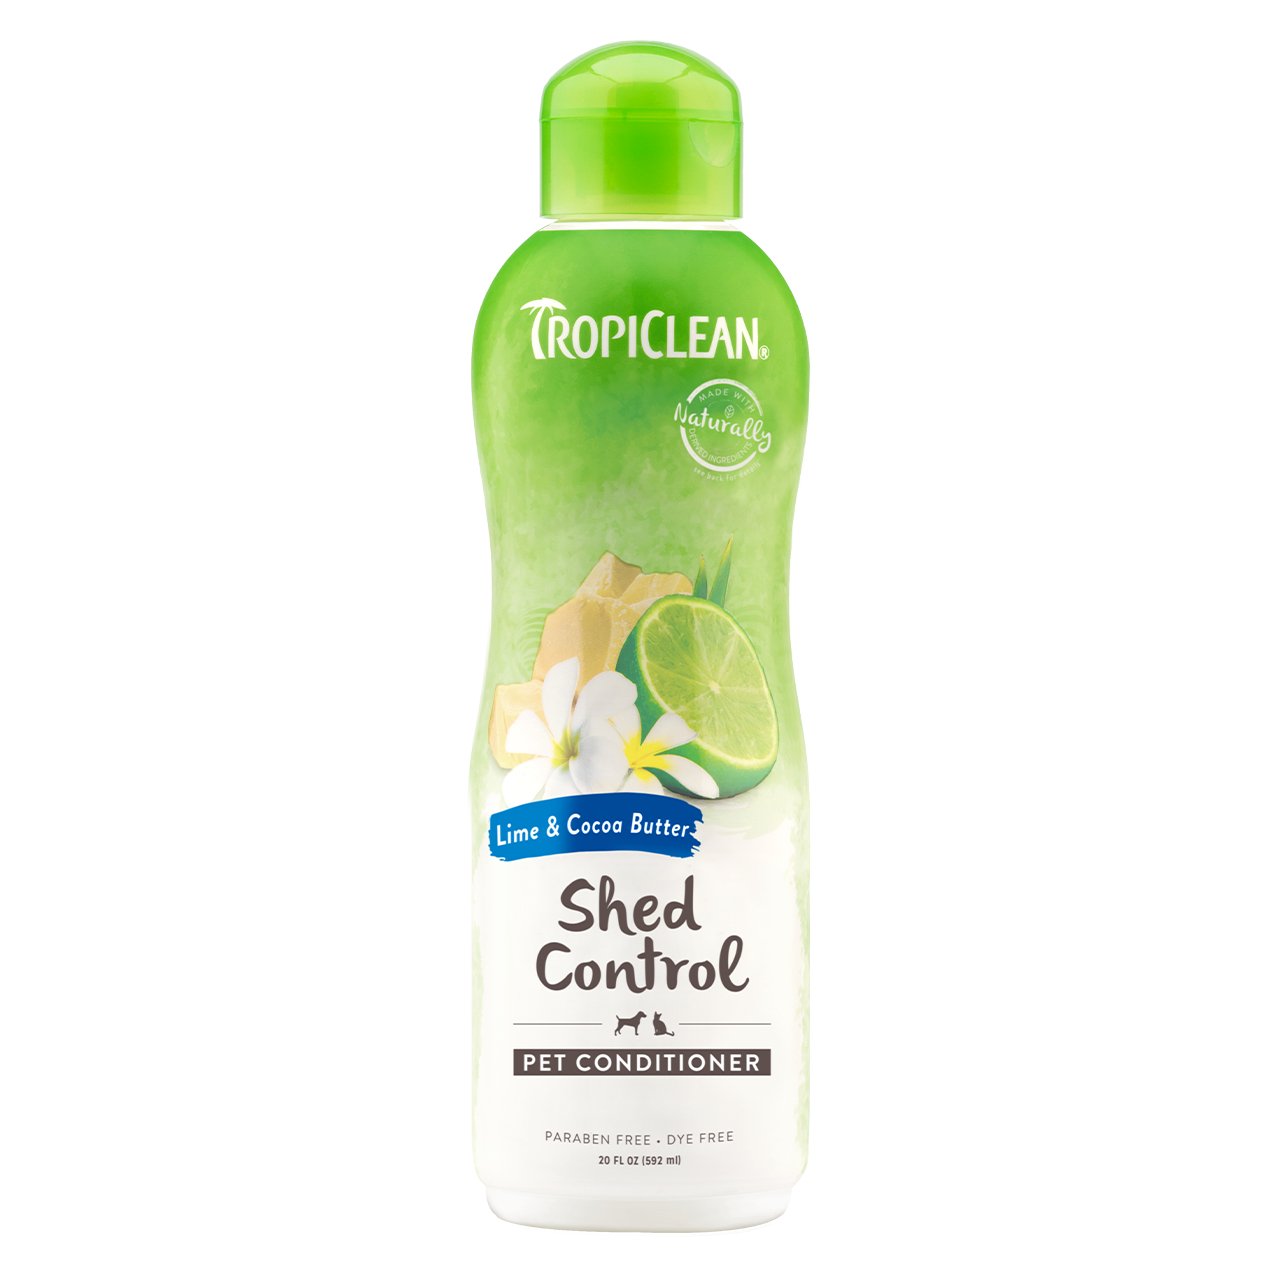 Tropiclean Dog Grooming Lime and Cocoa Butter Conditioner Shed Control 355/592ml